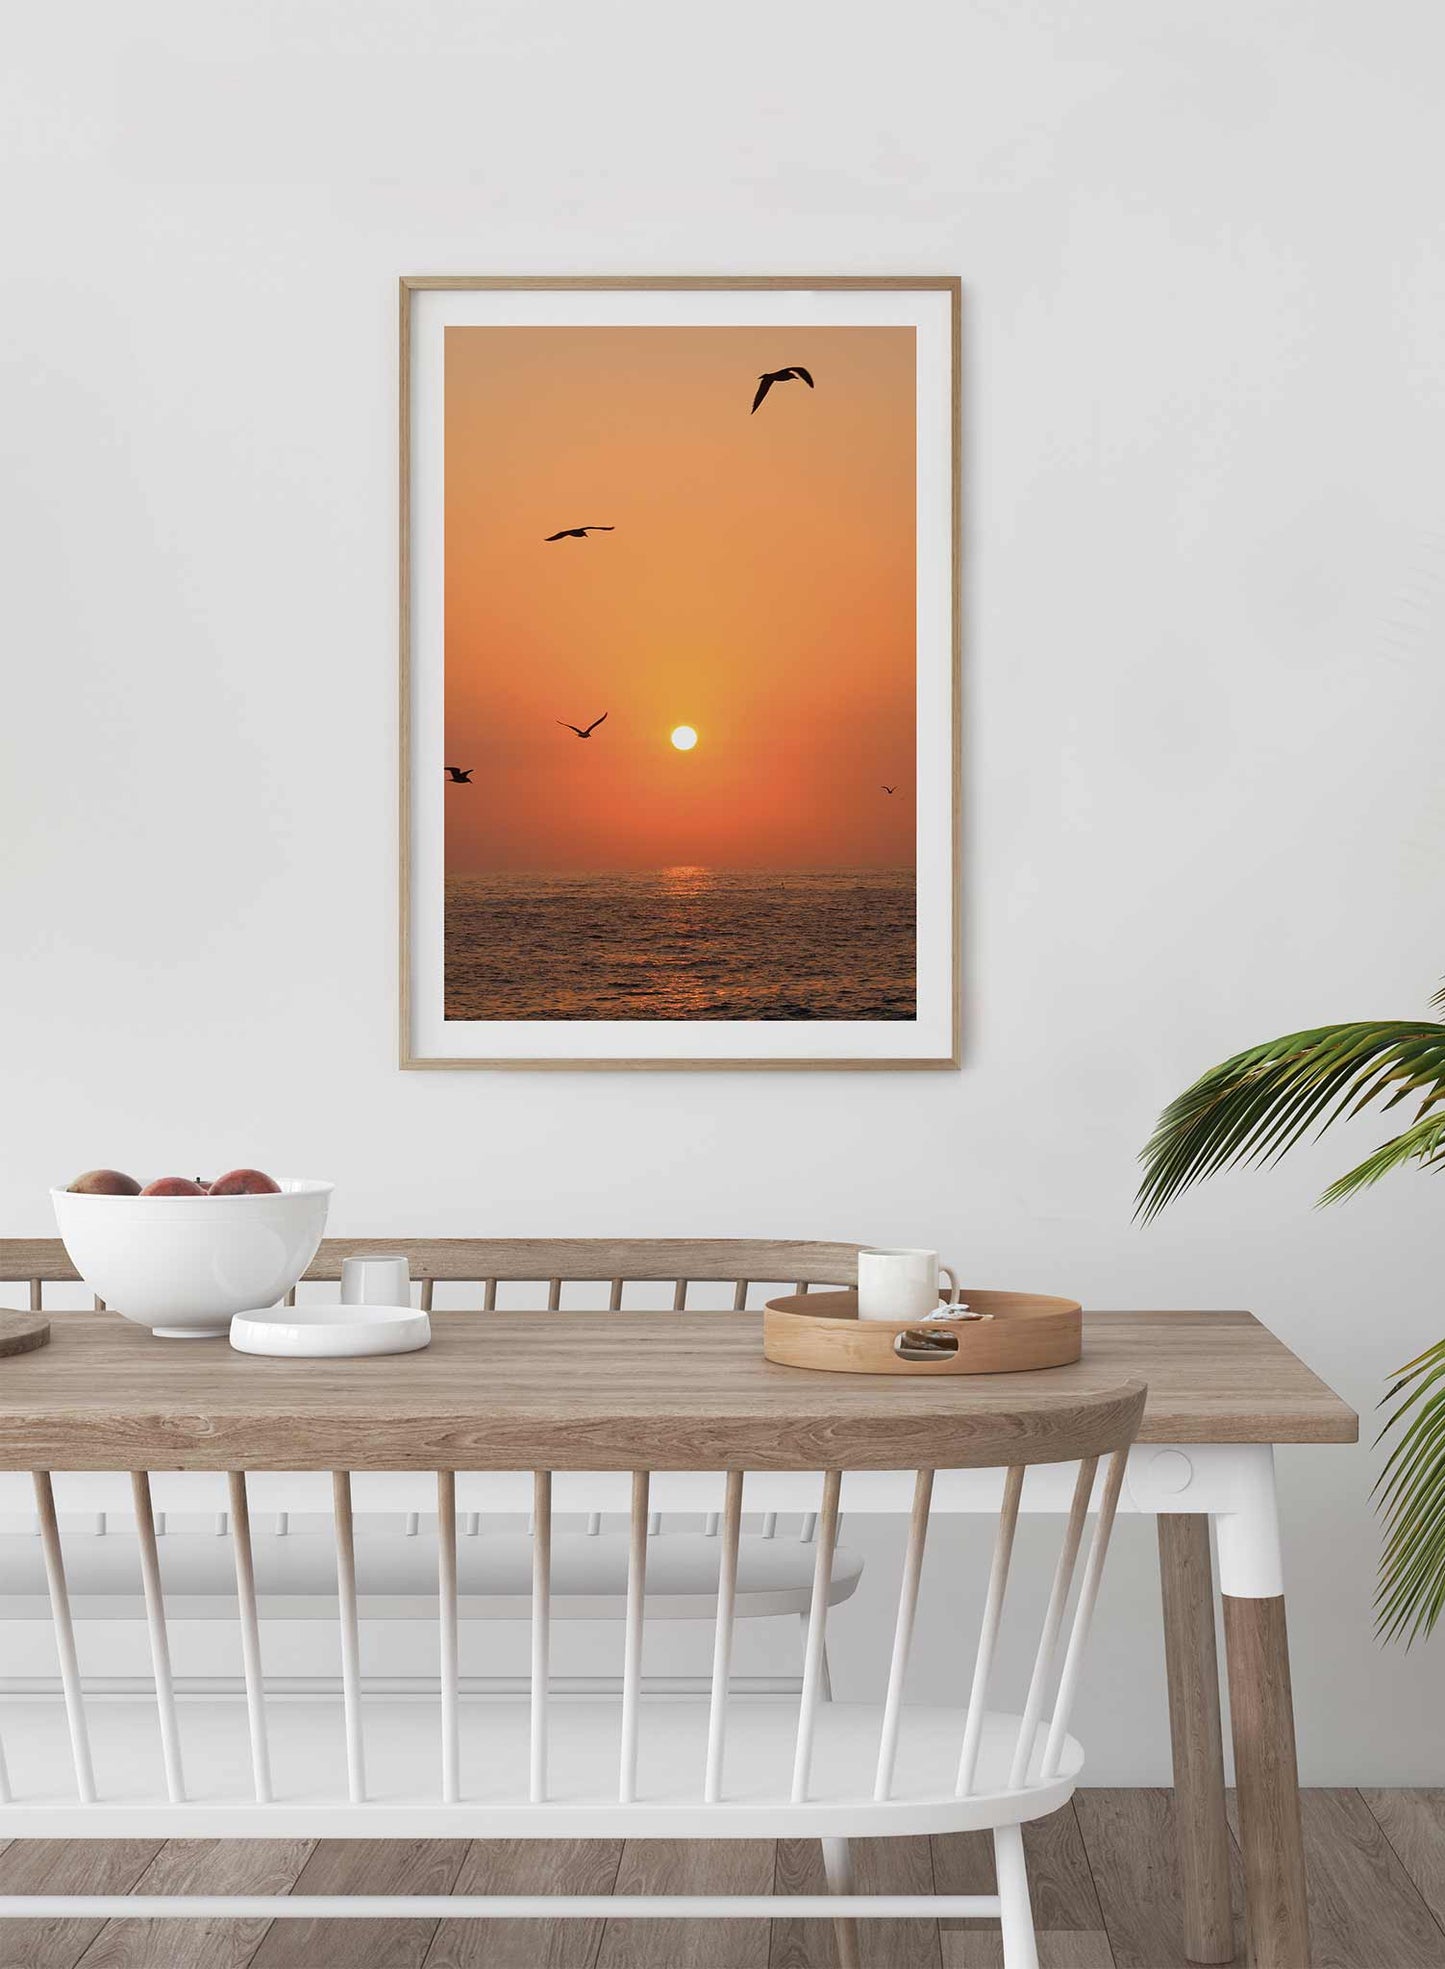 Flying into the Sunset is a minimalist photography of a scenery where three birds are flying above the sea as the orange sun sets by Opposite Wall.